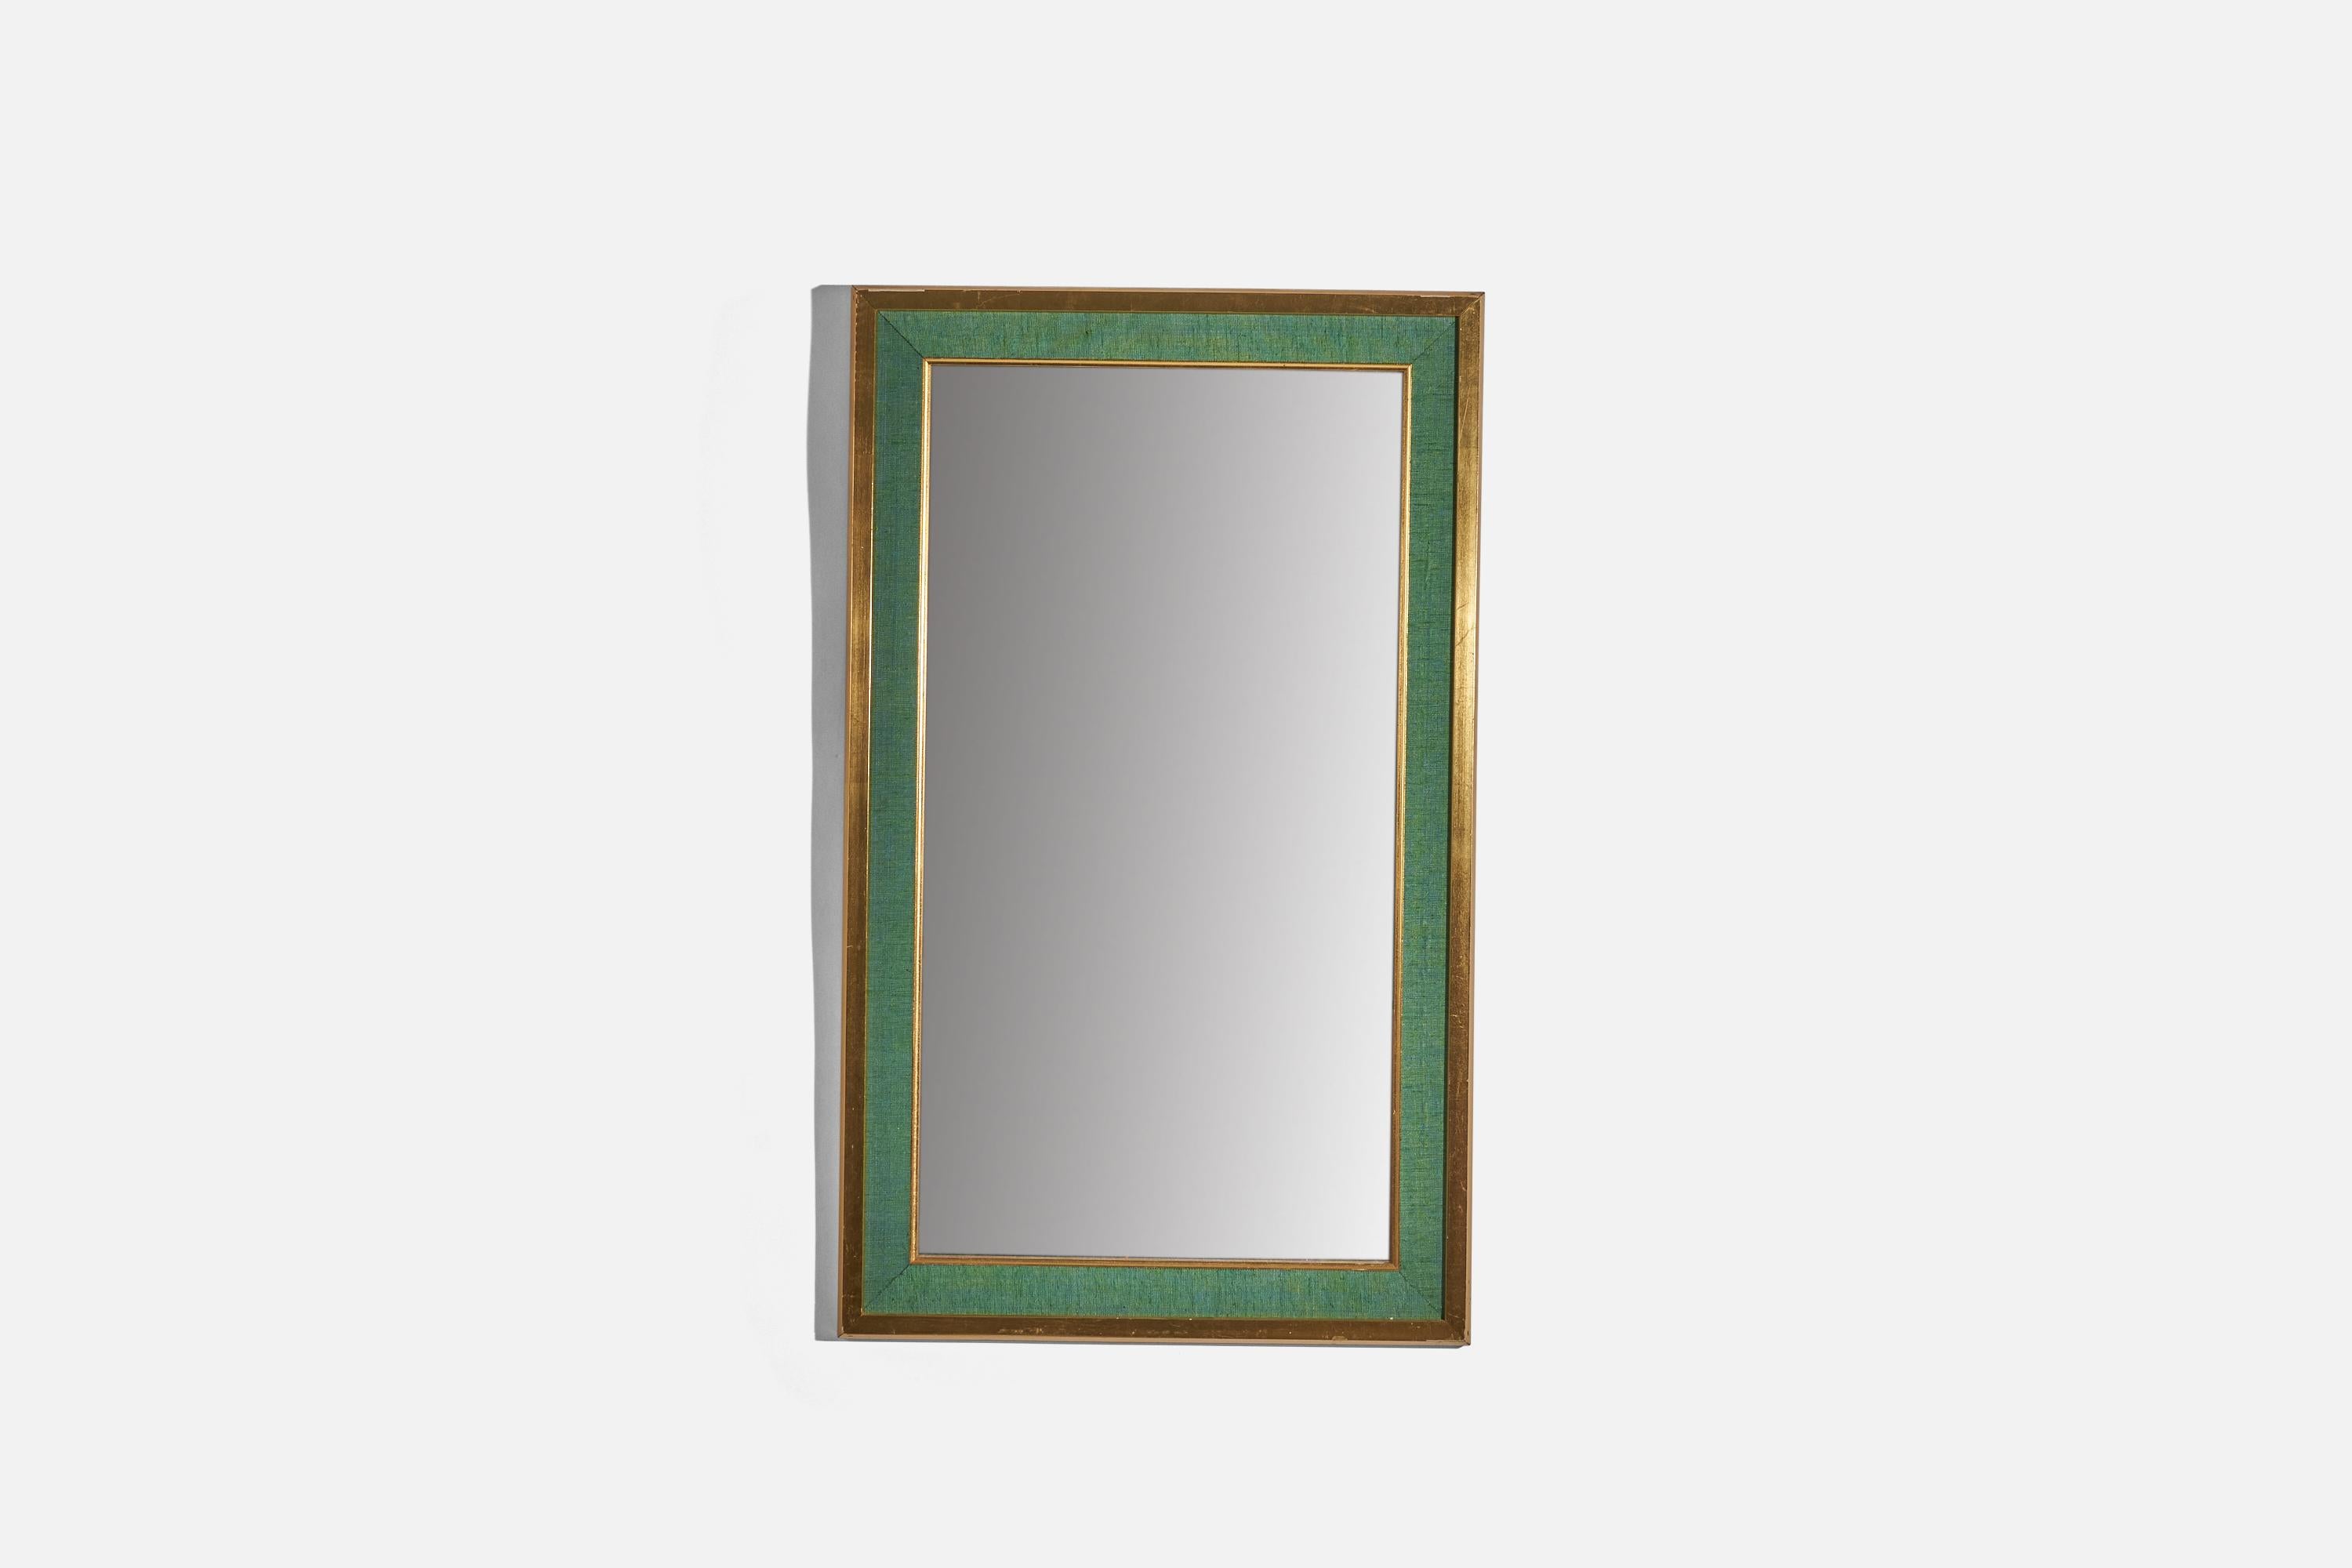 A gilt wood and green fabric wall mirror, design attributed to Estrid Ericson, in Sweden, c. 1950s.
   